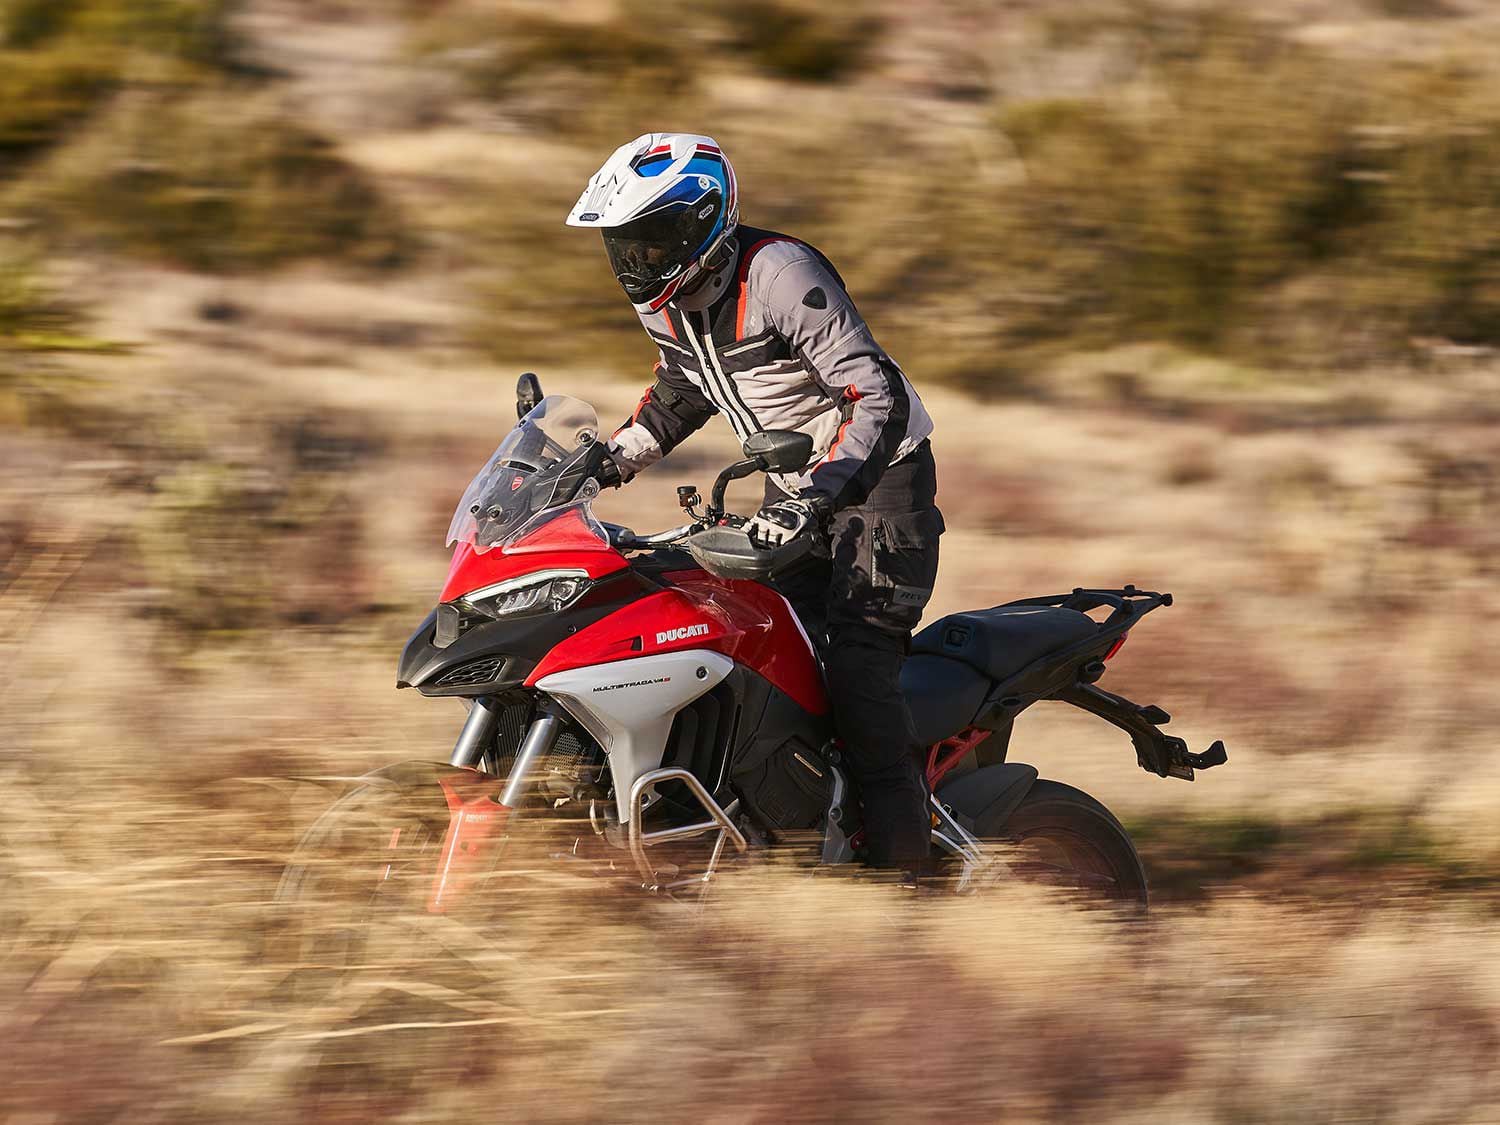 Six-foot tall riders will value the ergonomics of the Multistrada V4. It’s a comfortable mount both in seated and standing positions.